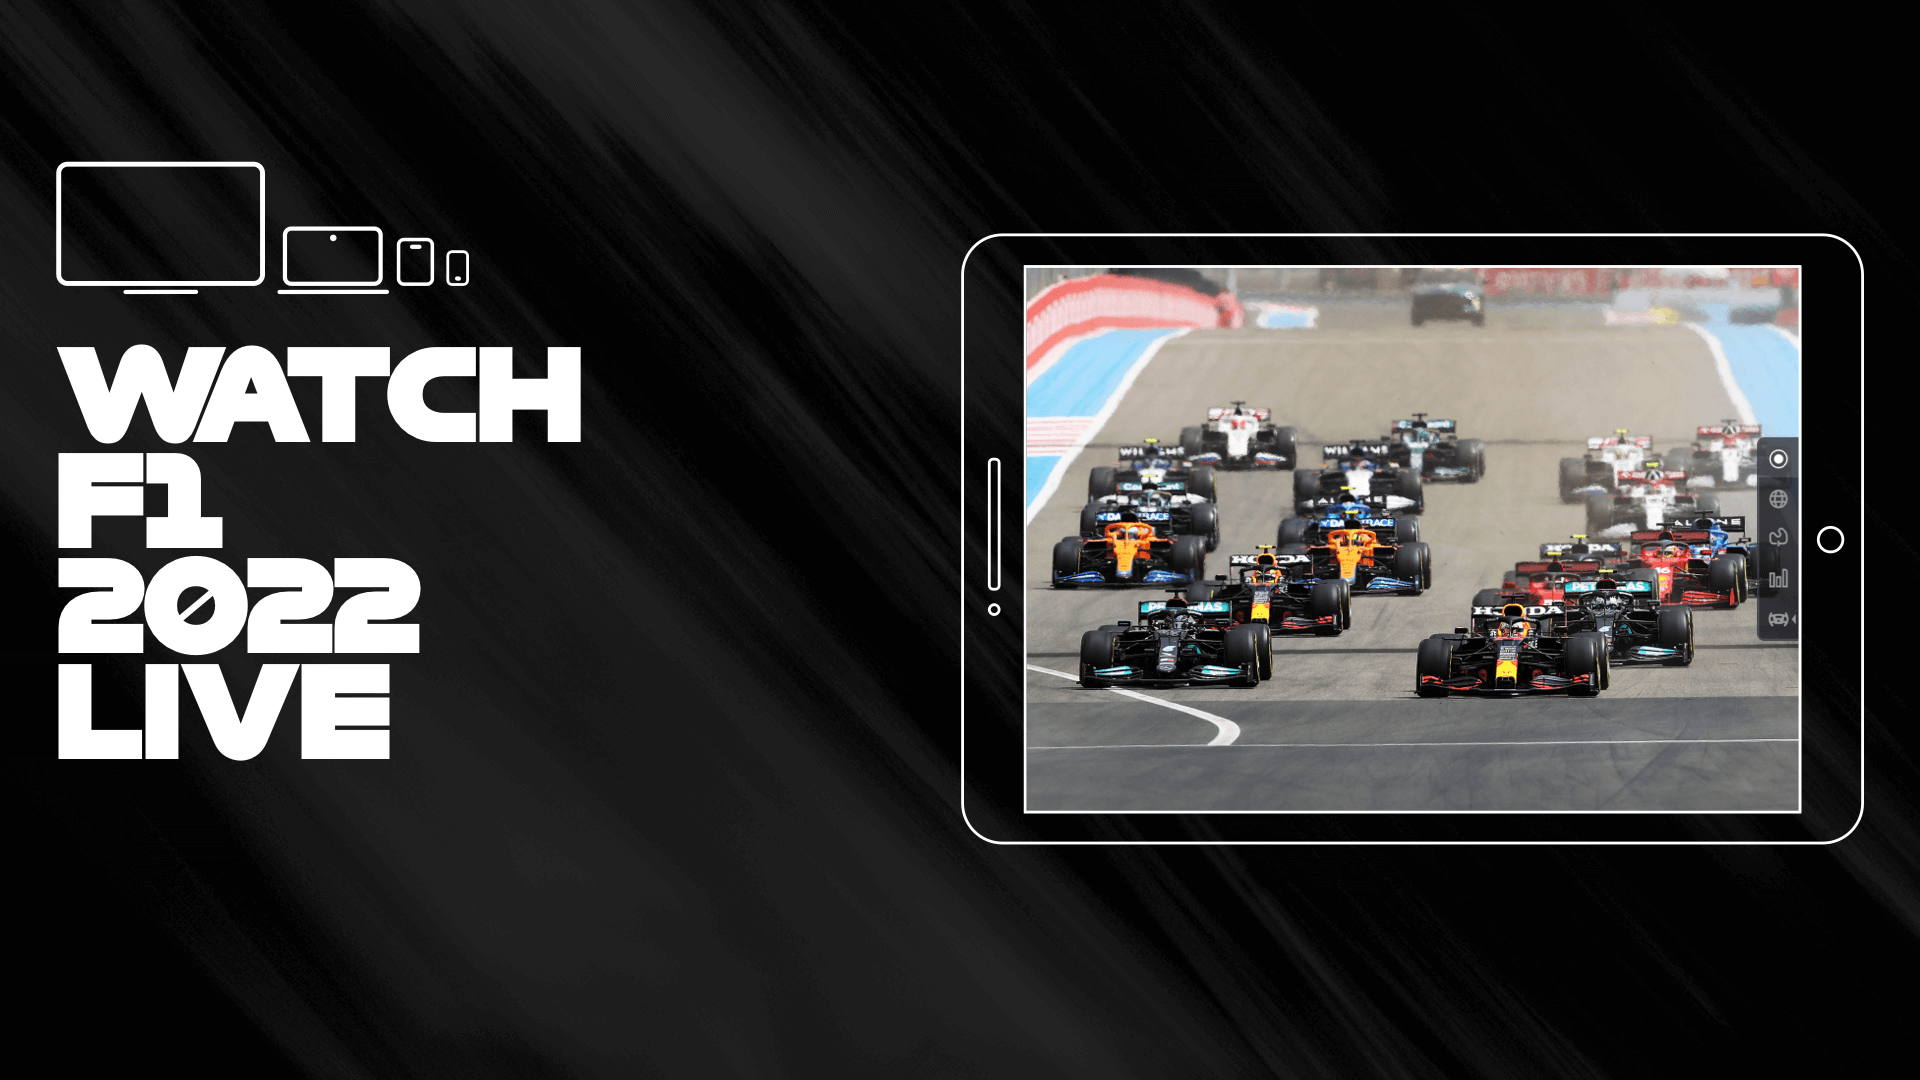 How To Fix F1 TV Not Working On iPhone, iPad, Or Android